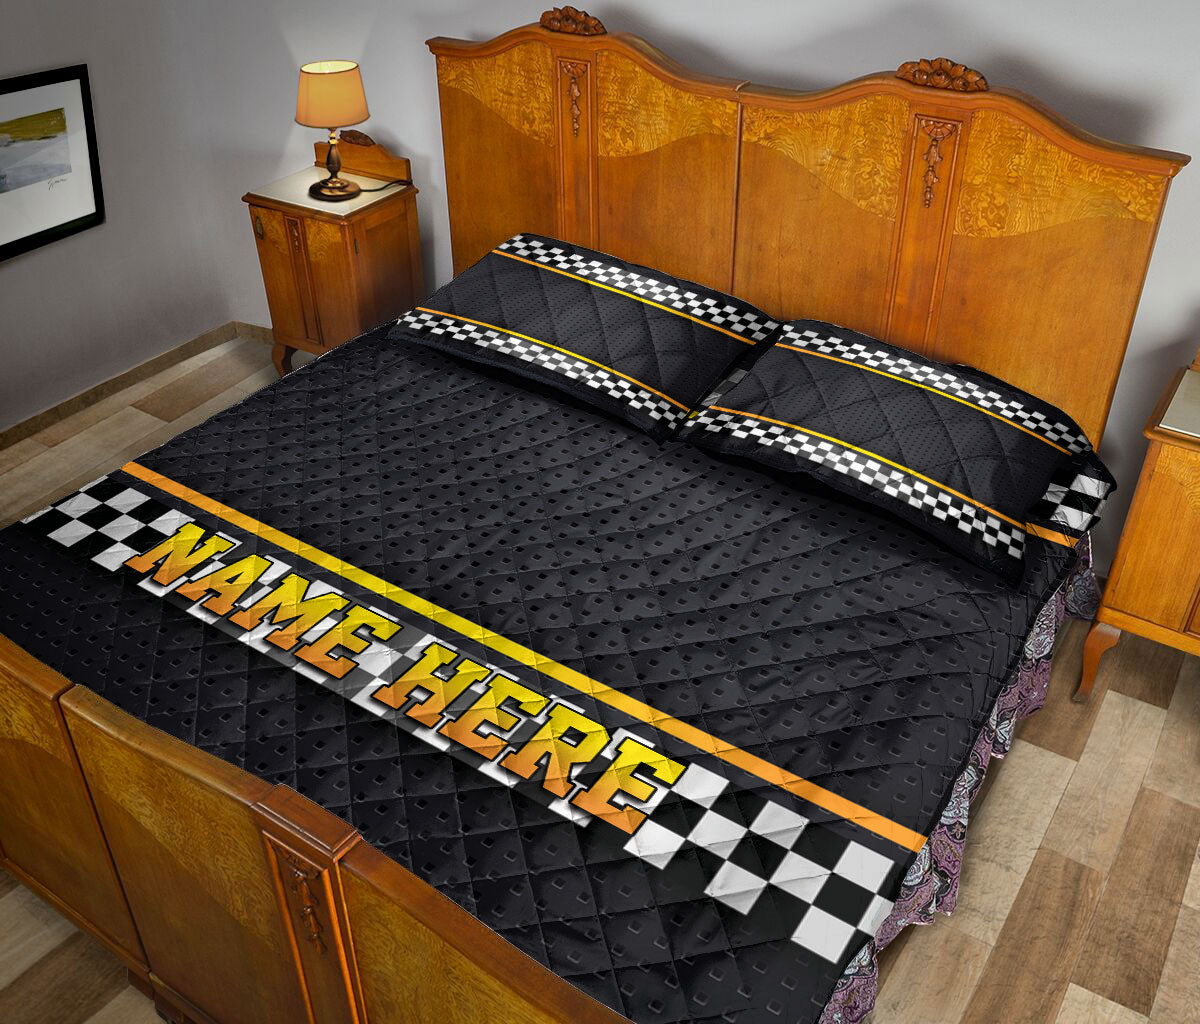 Ohaprints-Quilt-Bed-Set-Pillowcase-Racing-Race-Sheet-Structured-Metallic-Custom-Personalized-Name-Blanket-Bedspread-Bedding-3322-King (90'' x 100'')